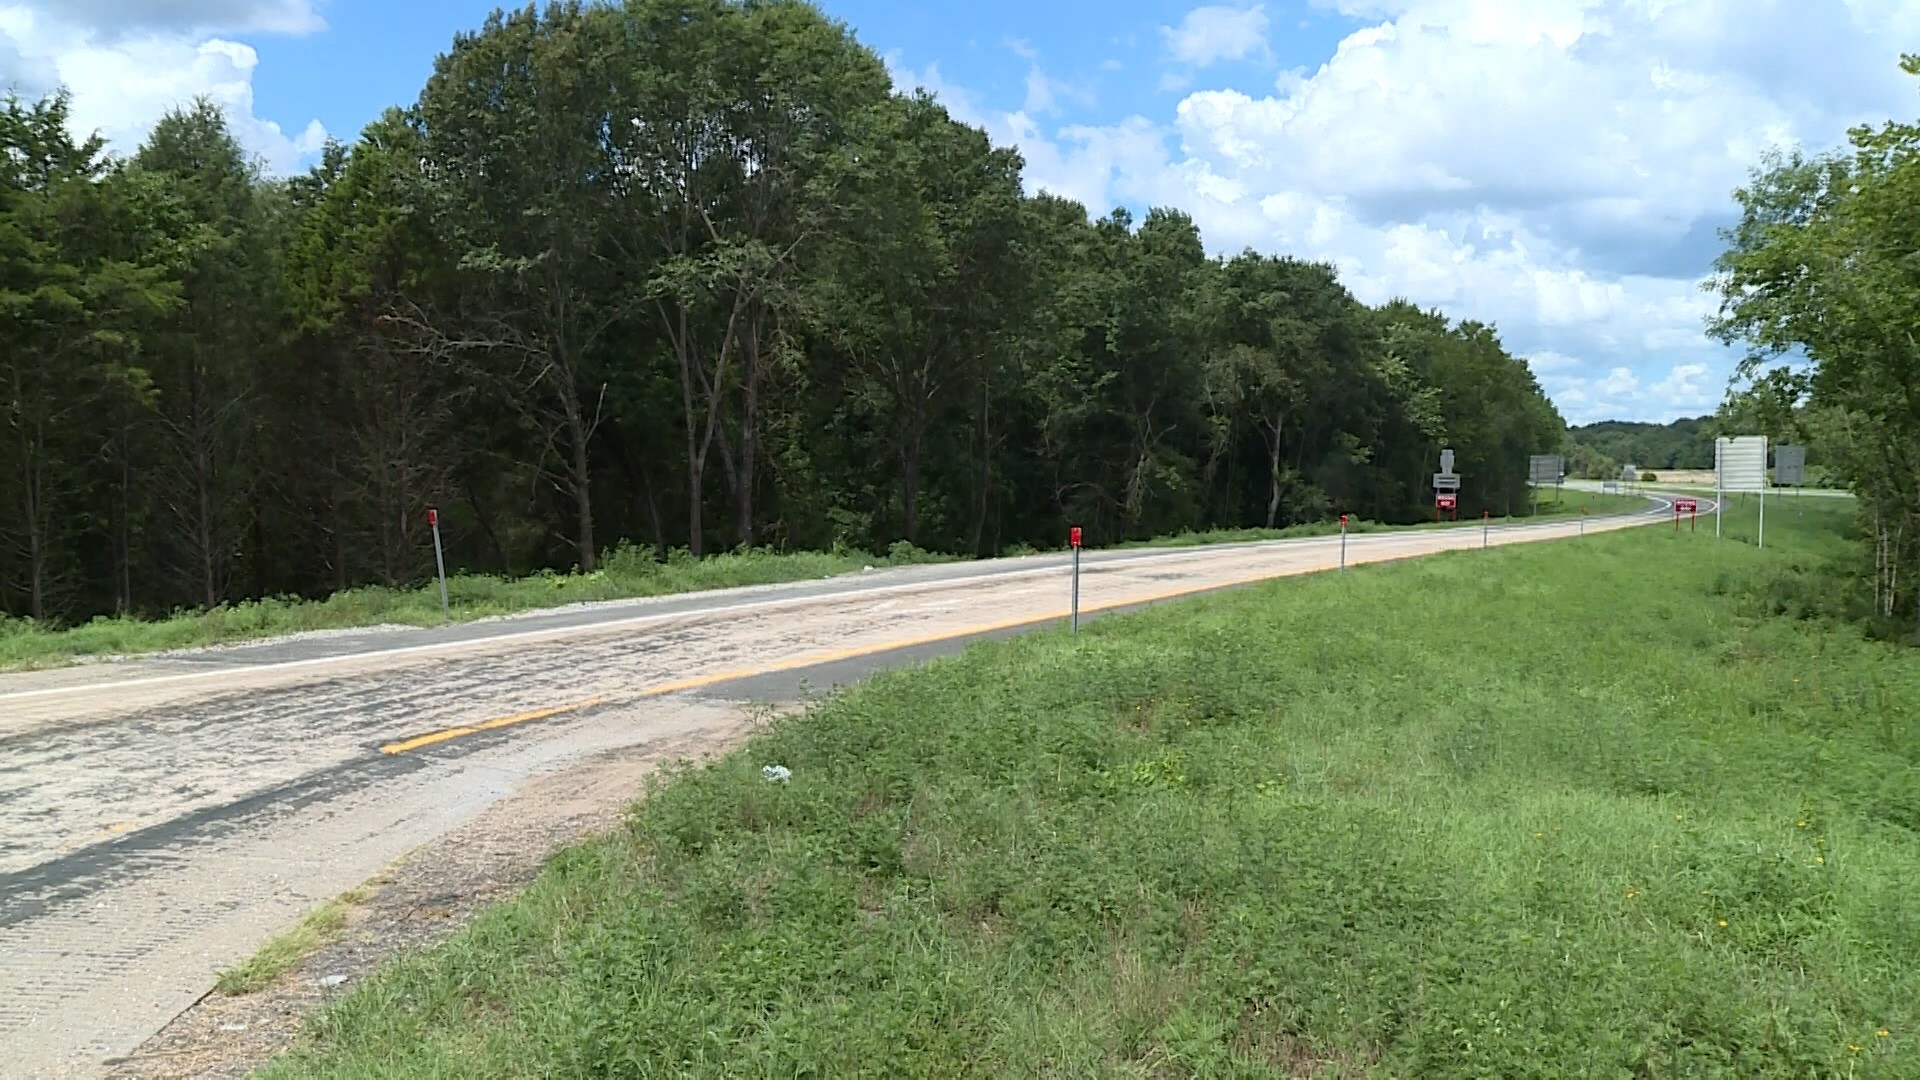 Investigators with the Franklin County Sheriff's Office confirmed that a body was found on the side of Highway 186 by passersby Wednesday morning.